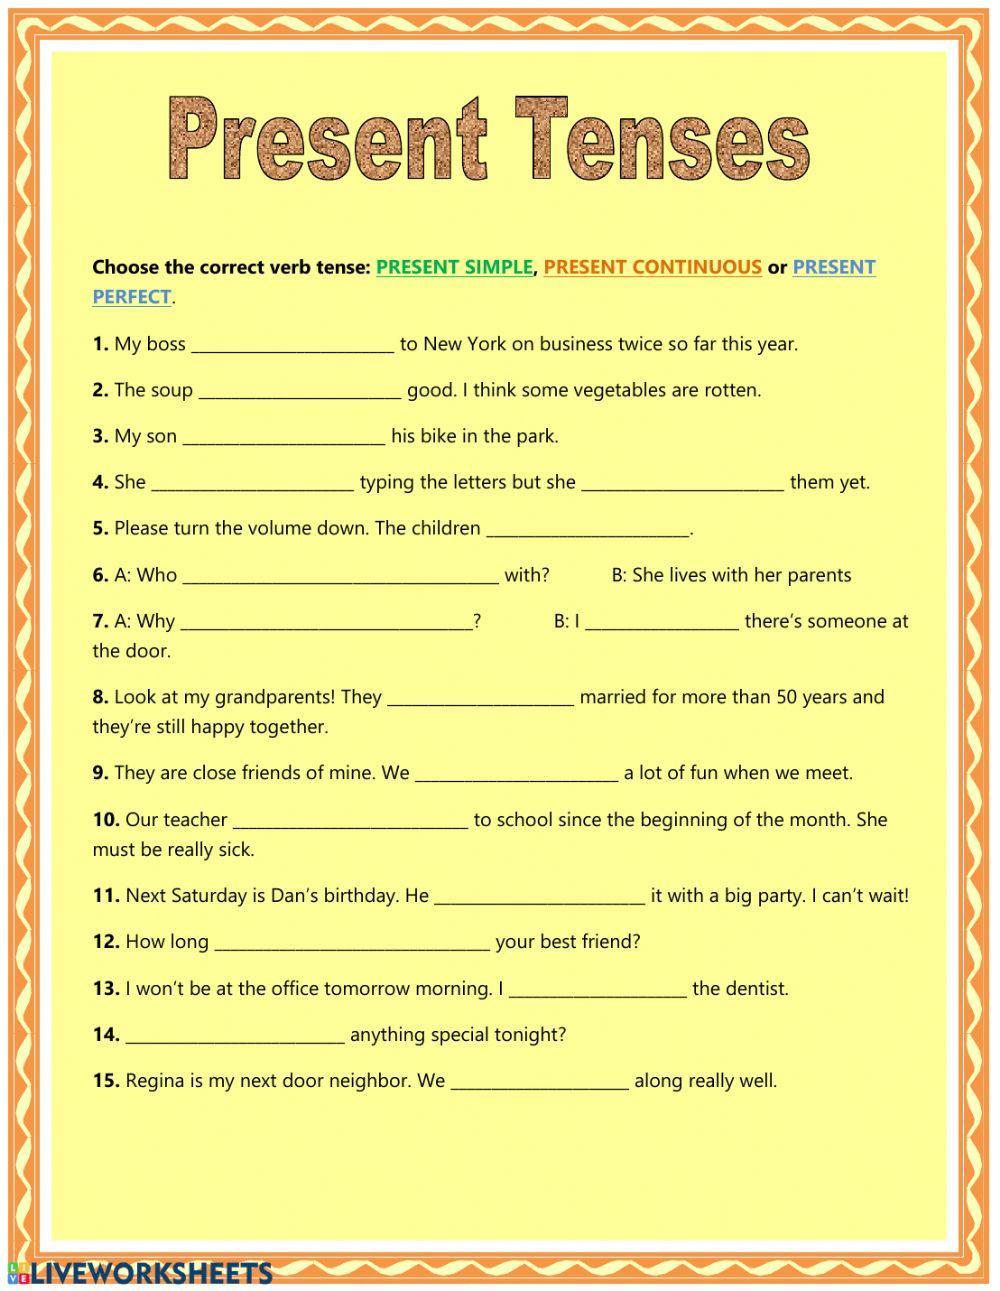 Present simple present continuous past simple exercise. Present perfect simple for Tenses. Mixed Tenses exercises Intermediate упражнения. Past perfect and past simple Tenses exercise. Present perfect simple Tense exercise.